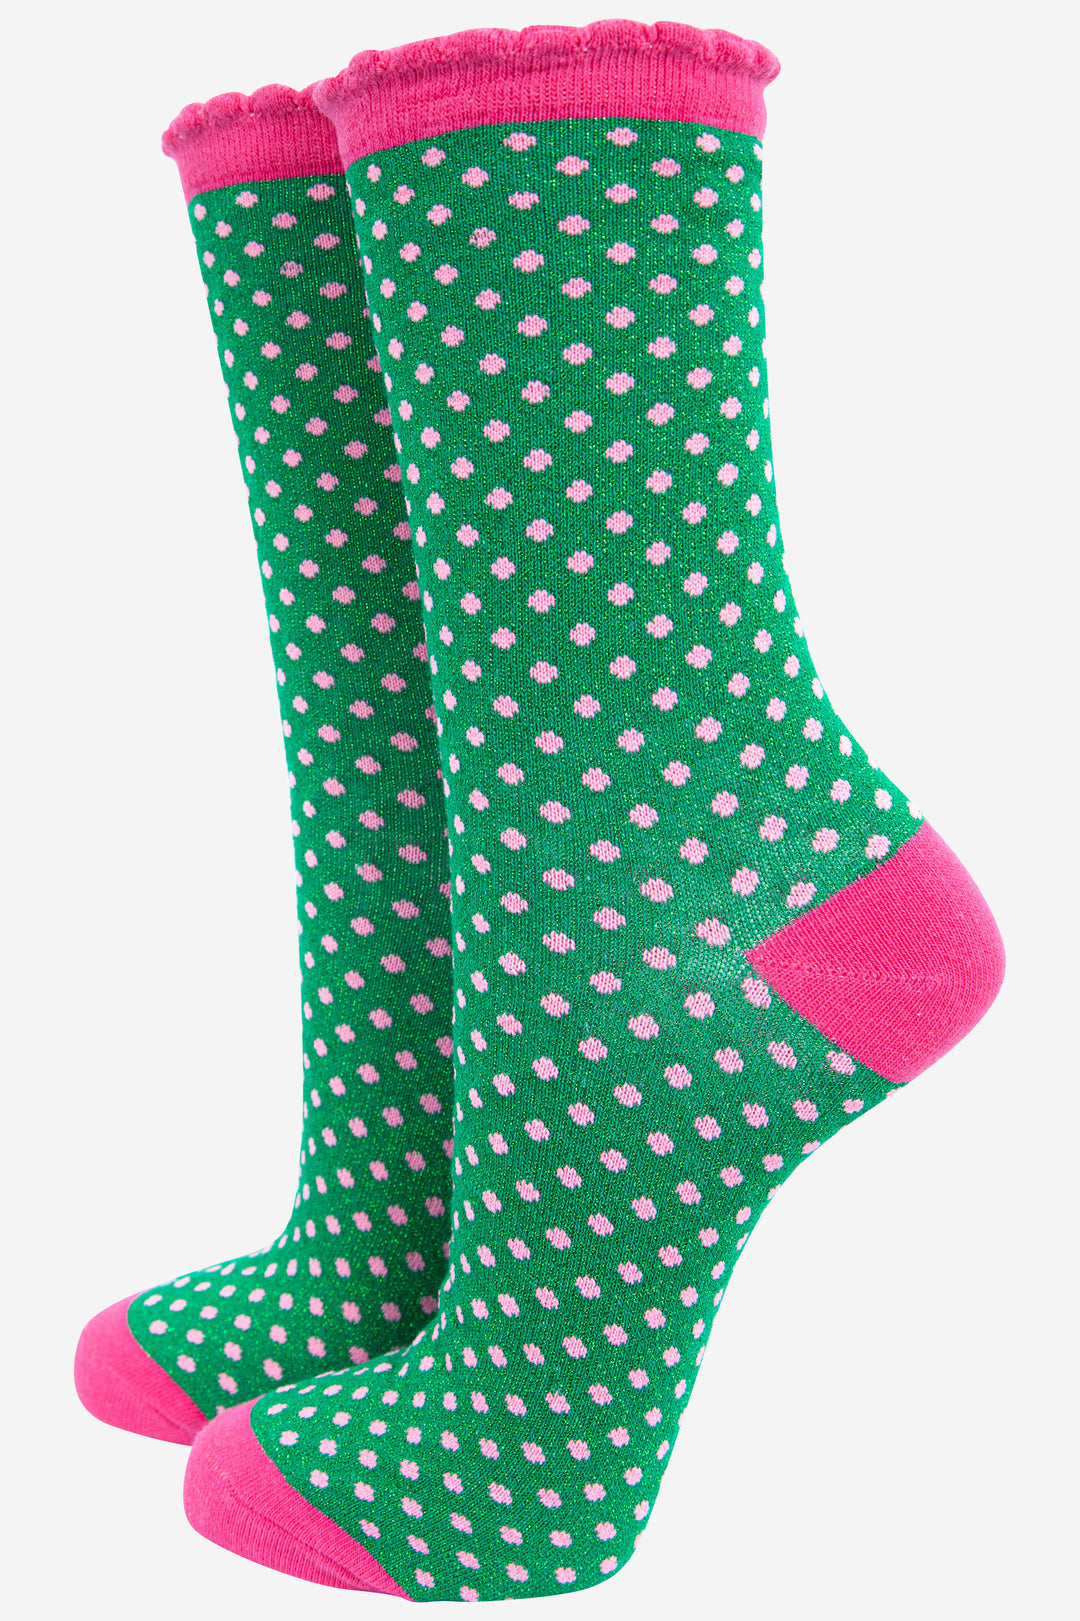 green glitter ankle socks with a pink scalloped top and an all over pink polka dot pattern